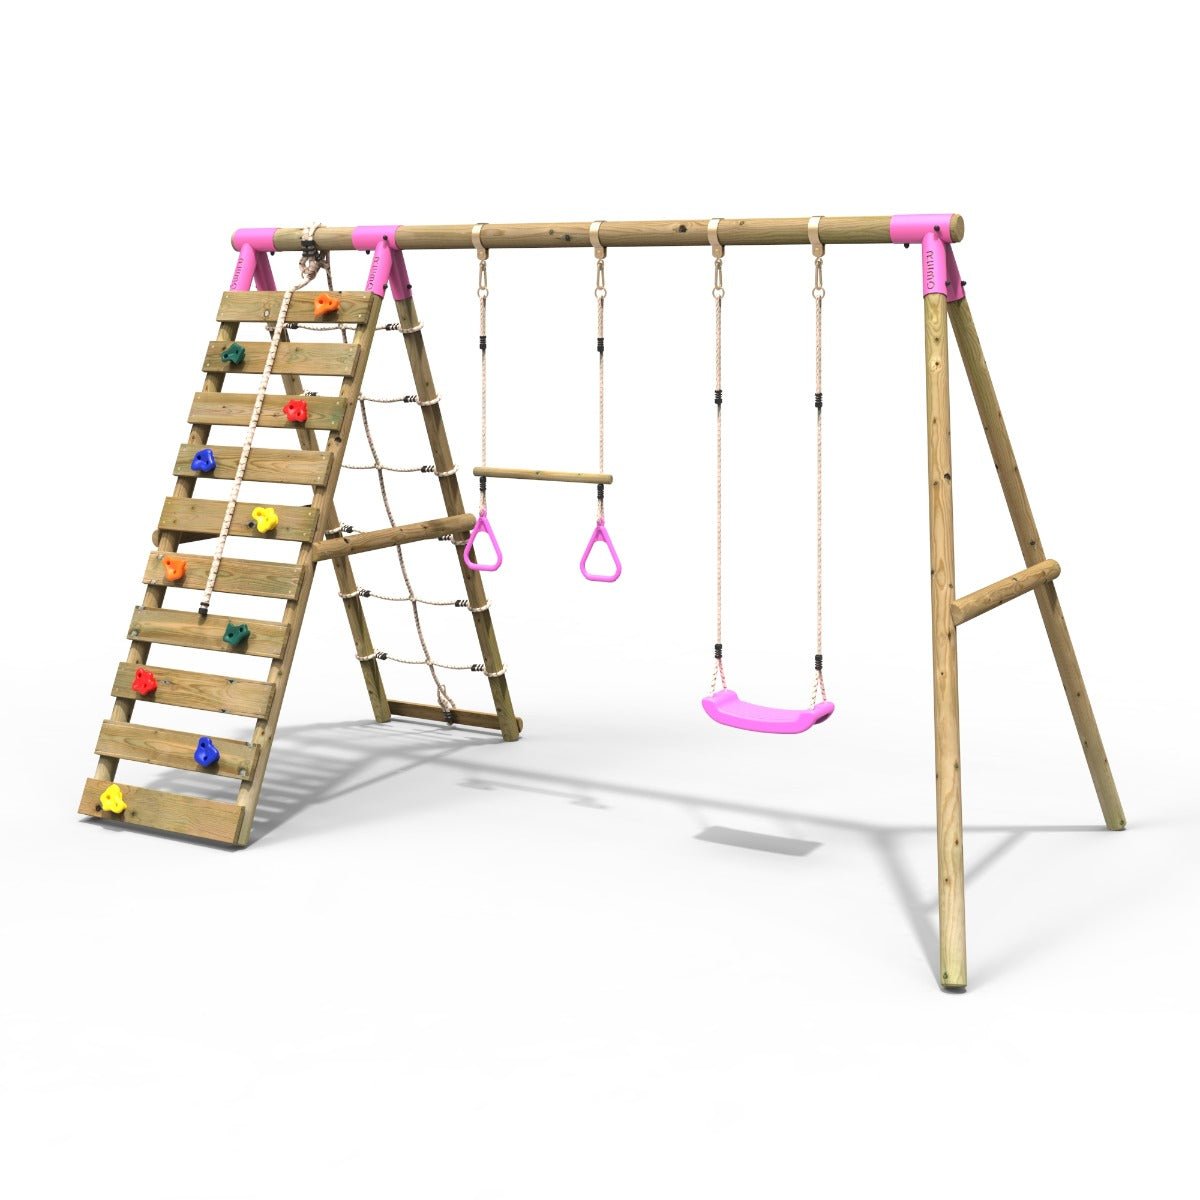 Rebo Wooden Swing Set with Up and Over Climbing Wall - Savannah Pink